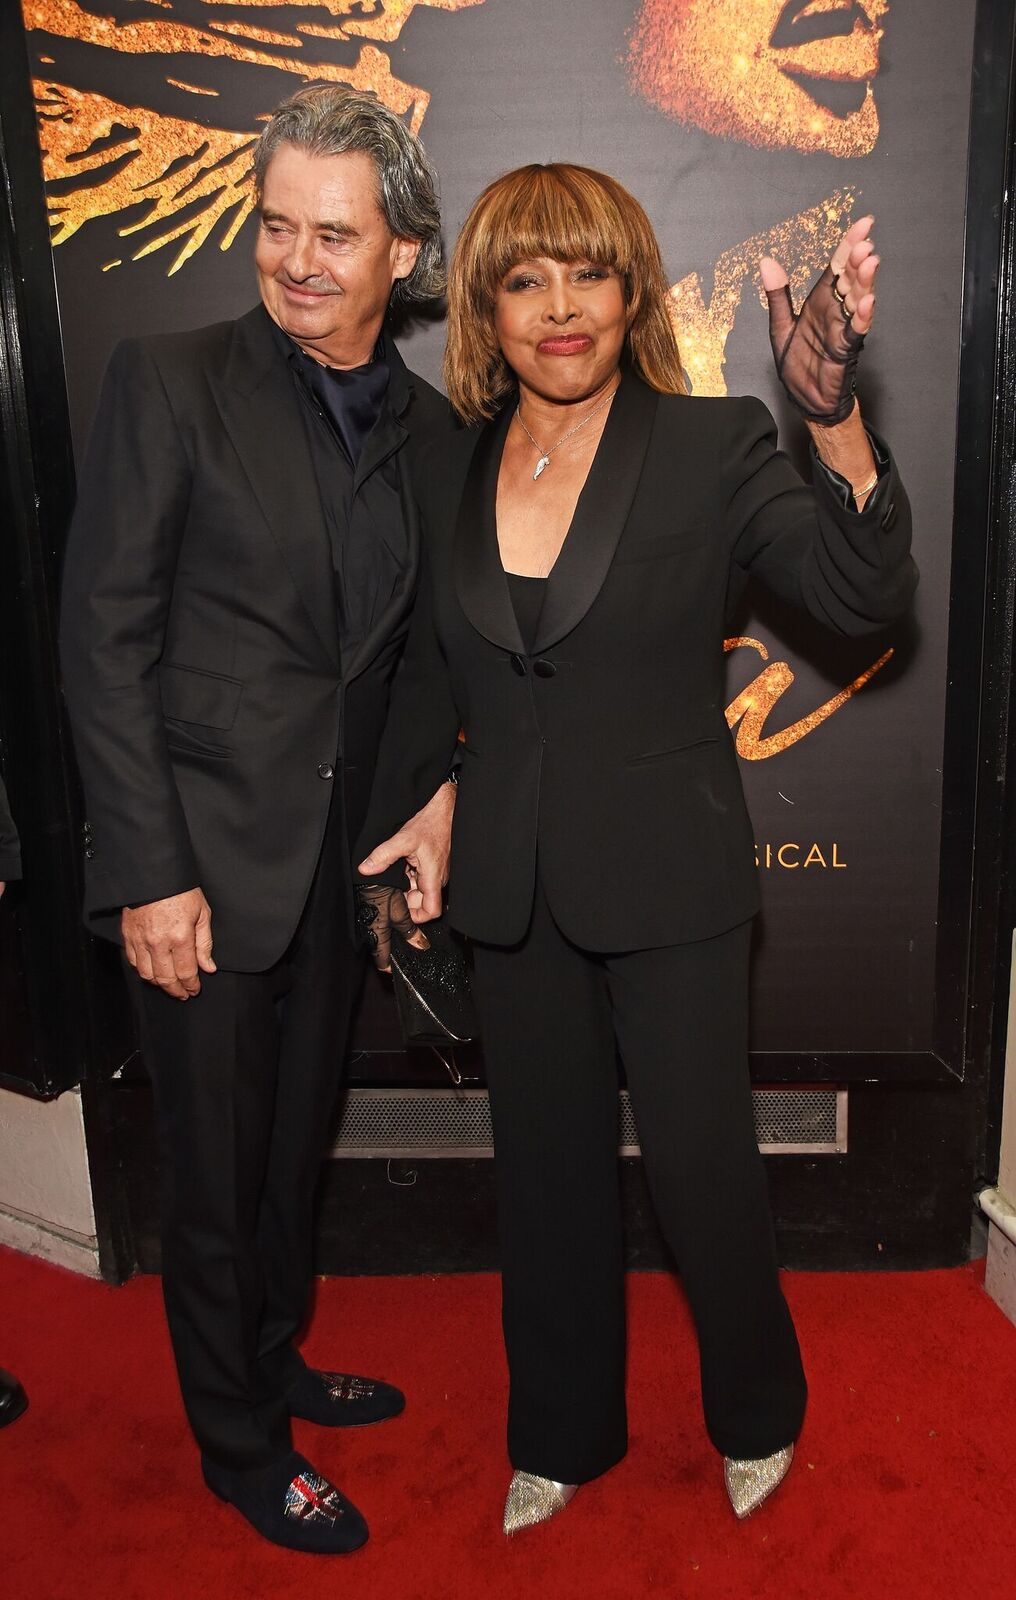  Erwin Bach and Tina Turner at the press night performance of "Tina: The Tina Turner Musical" in 2018 in London